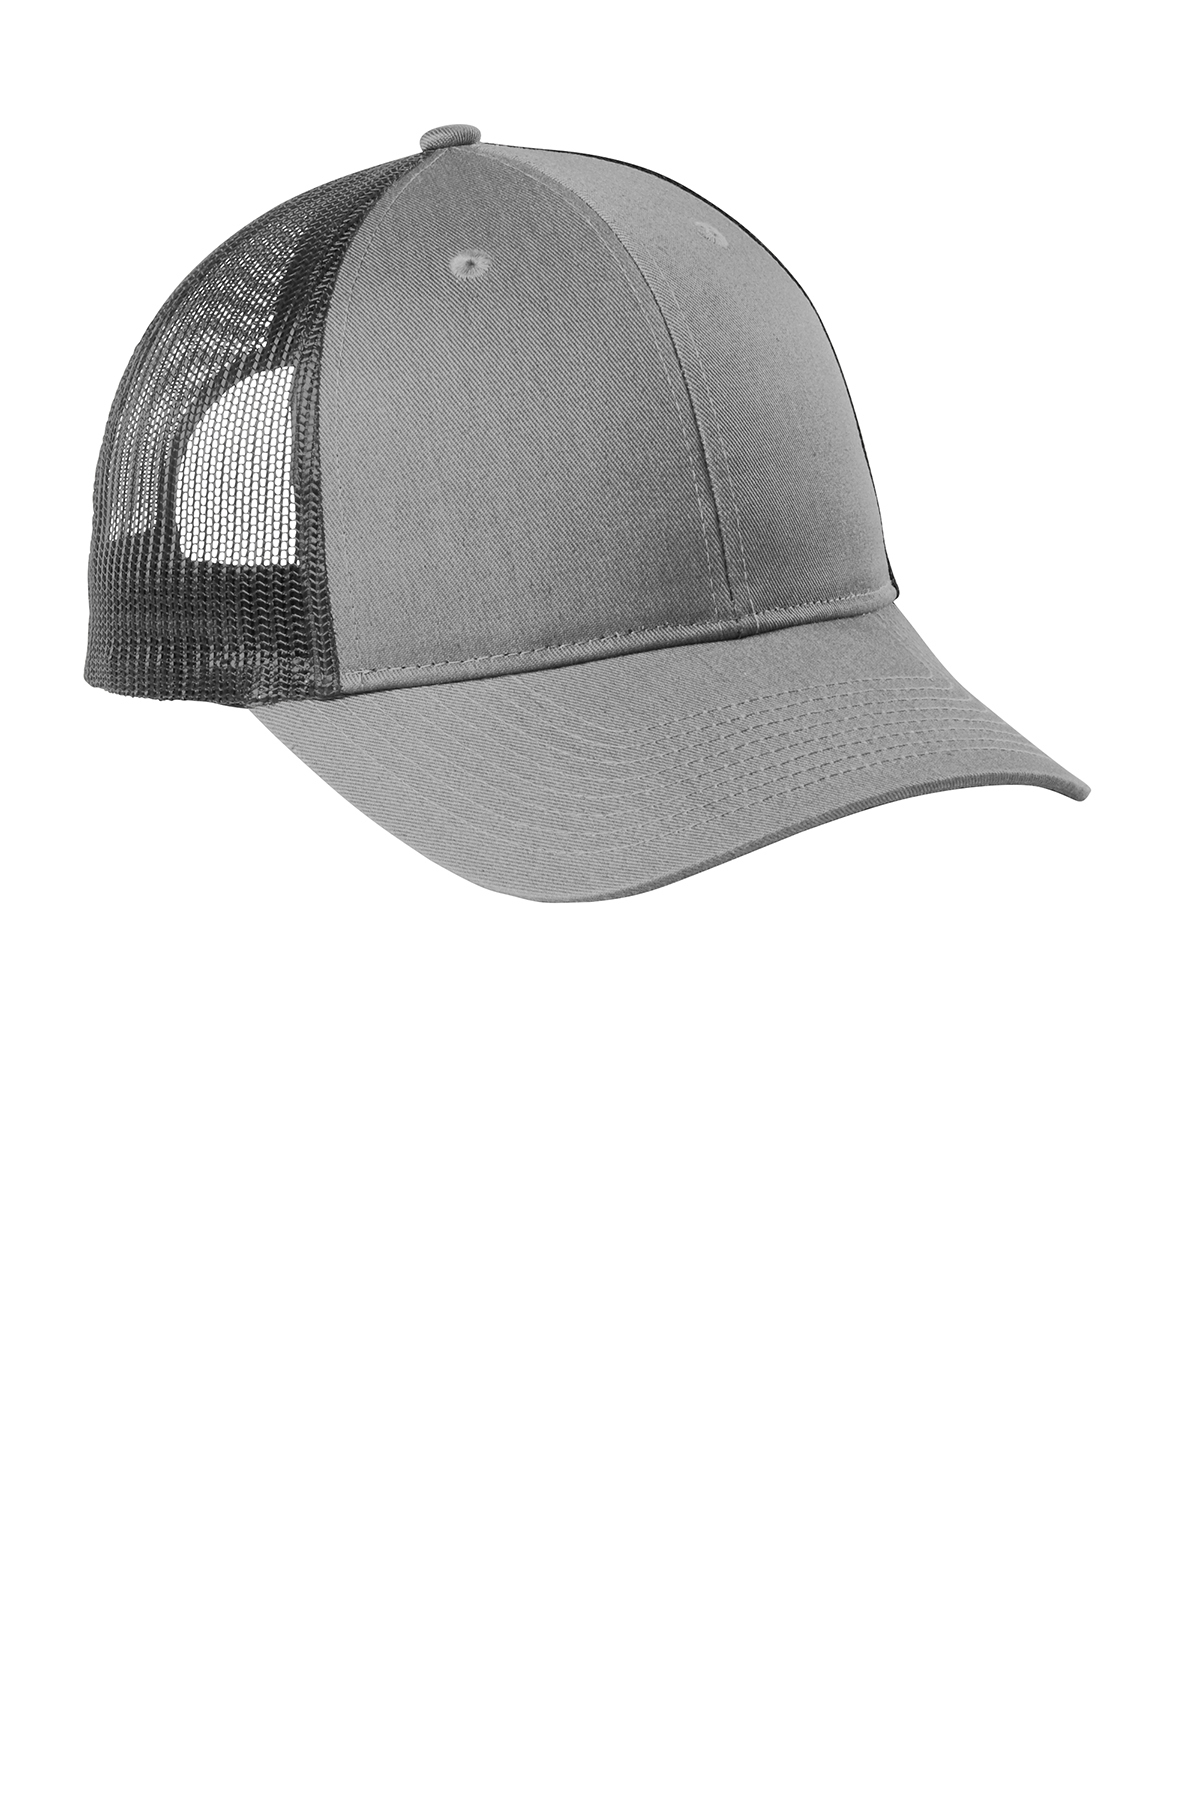 click to view Heather Grey/ Grey Steel